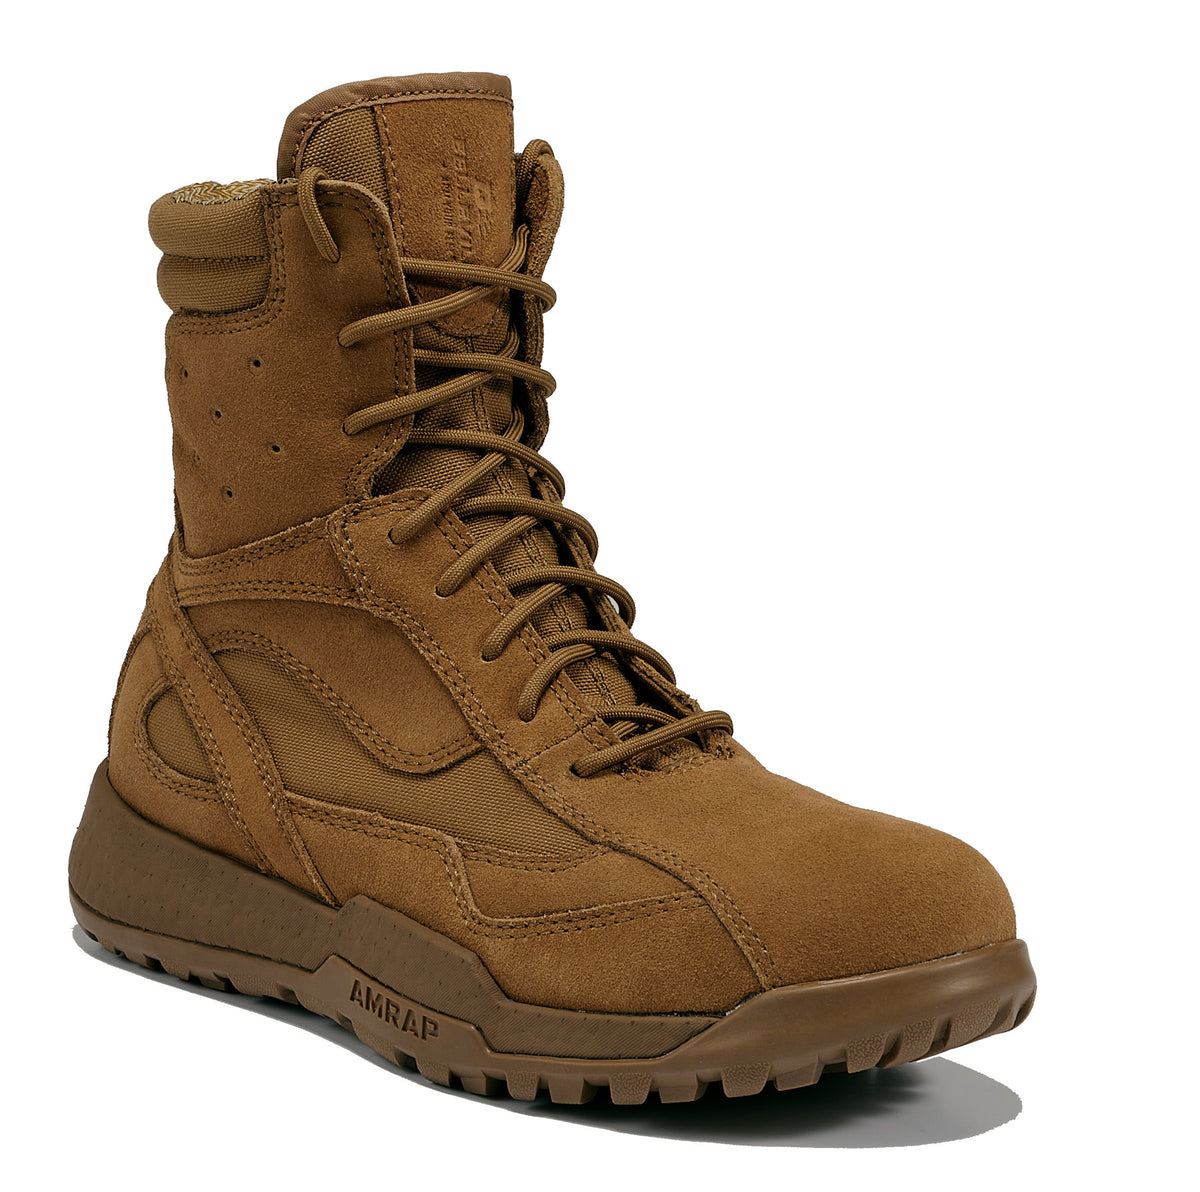 TR1040-T / 7 Inch Ultralight Tactical Boot